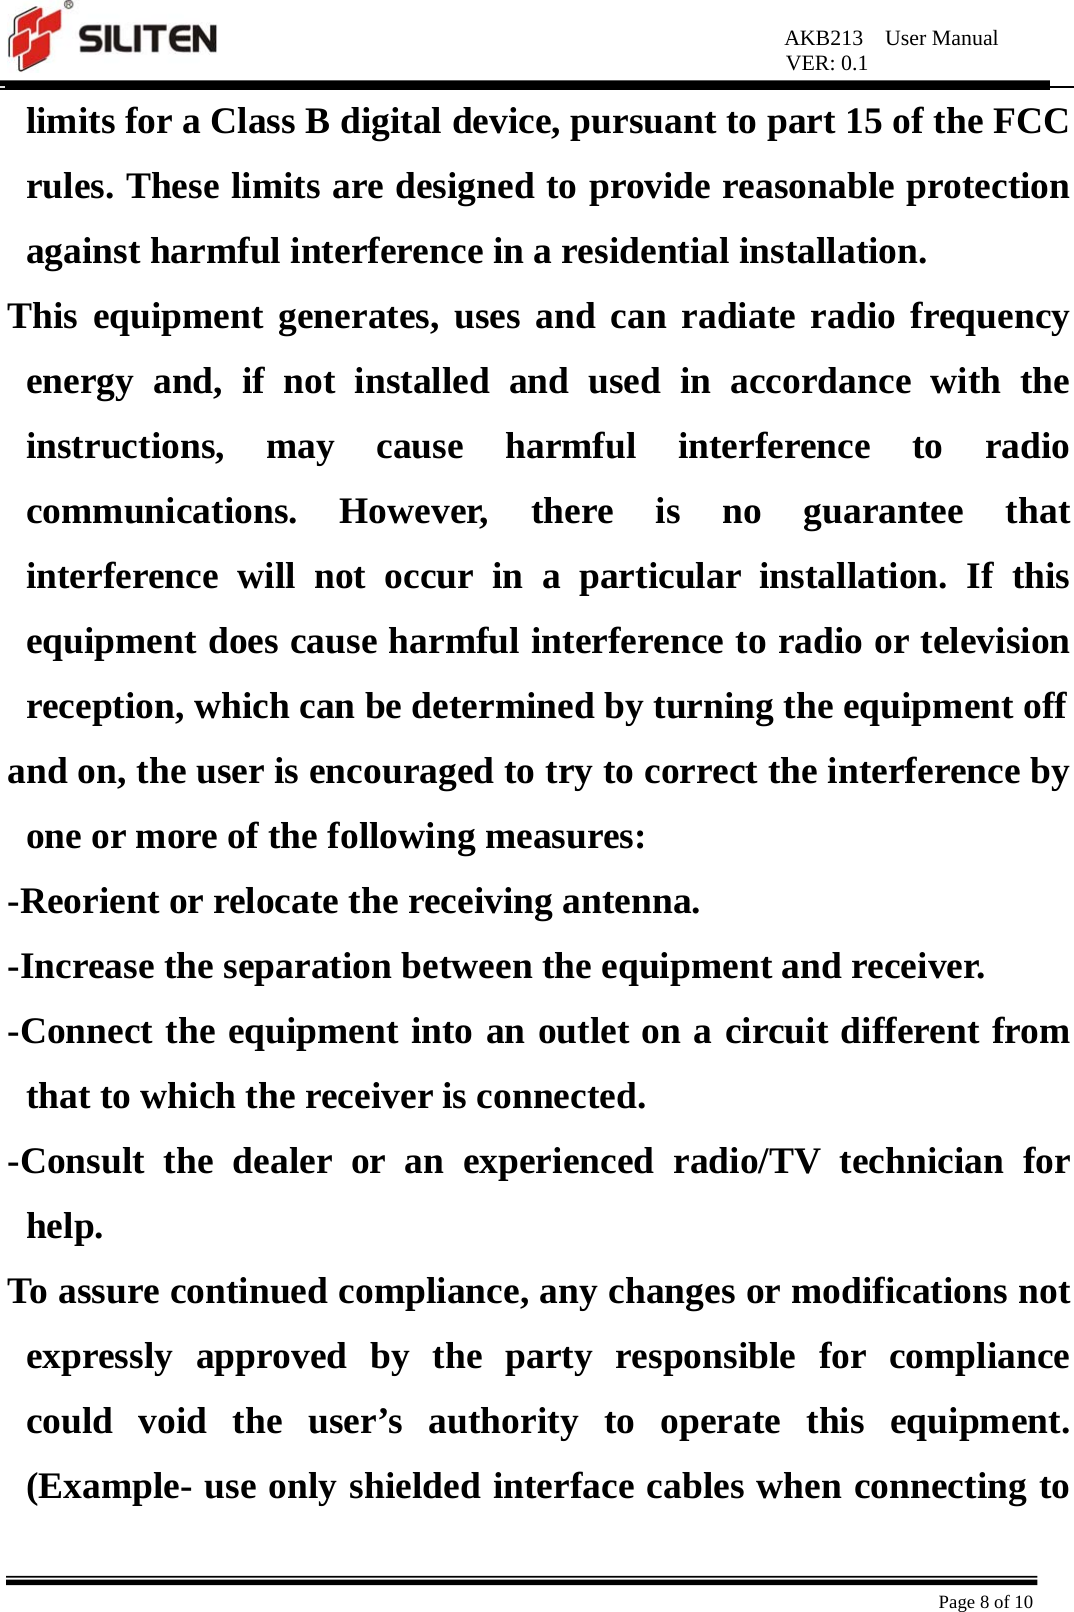 AKB213  User Manual VER: 0.1  Page 8 of 10 limits for a Class B digital device, pursuant to part 15 of the FCC rules. These limits are designed to provide reasonable protection against harmful interference in a residential installation.   This equipment generates, uses and can radiate radio frequency energy and, if not installed and used in accordance with the instructions, may cause harmful interference to radio communications. However, there is no guarantee that interference will not occur in a particular installation. If this equipment does cause harmful interference to radio or television reception, which can be determined by turning the equipment off   and on, the user is encouraged to try to correct the interference by one or more of the following measures:   -Reorient or relocate the receiving antenna.   -Increase the separation between the equipment and receiver.   -Connect the equipment into an outlet on a circuit different from that to which the receiver is connected.   -Consult the dealer or an experienced radio/TV technician for help.  To assure continued compliance, any changes or modifications not expressly approved by the party responsible for compliance could void the user’s authority to operate this equipment. (Example- use only shielded interface cables when connecting to 